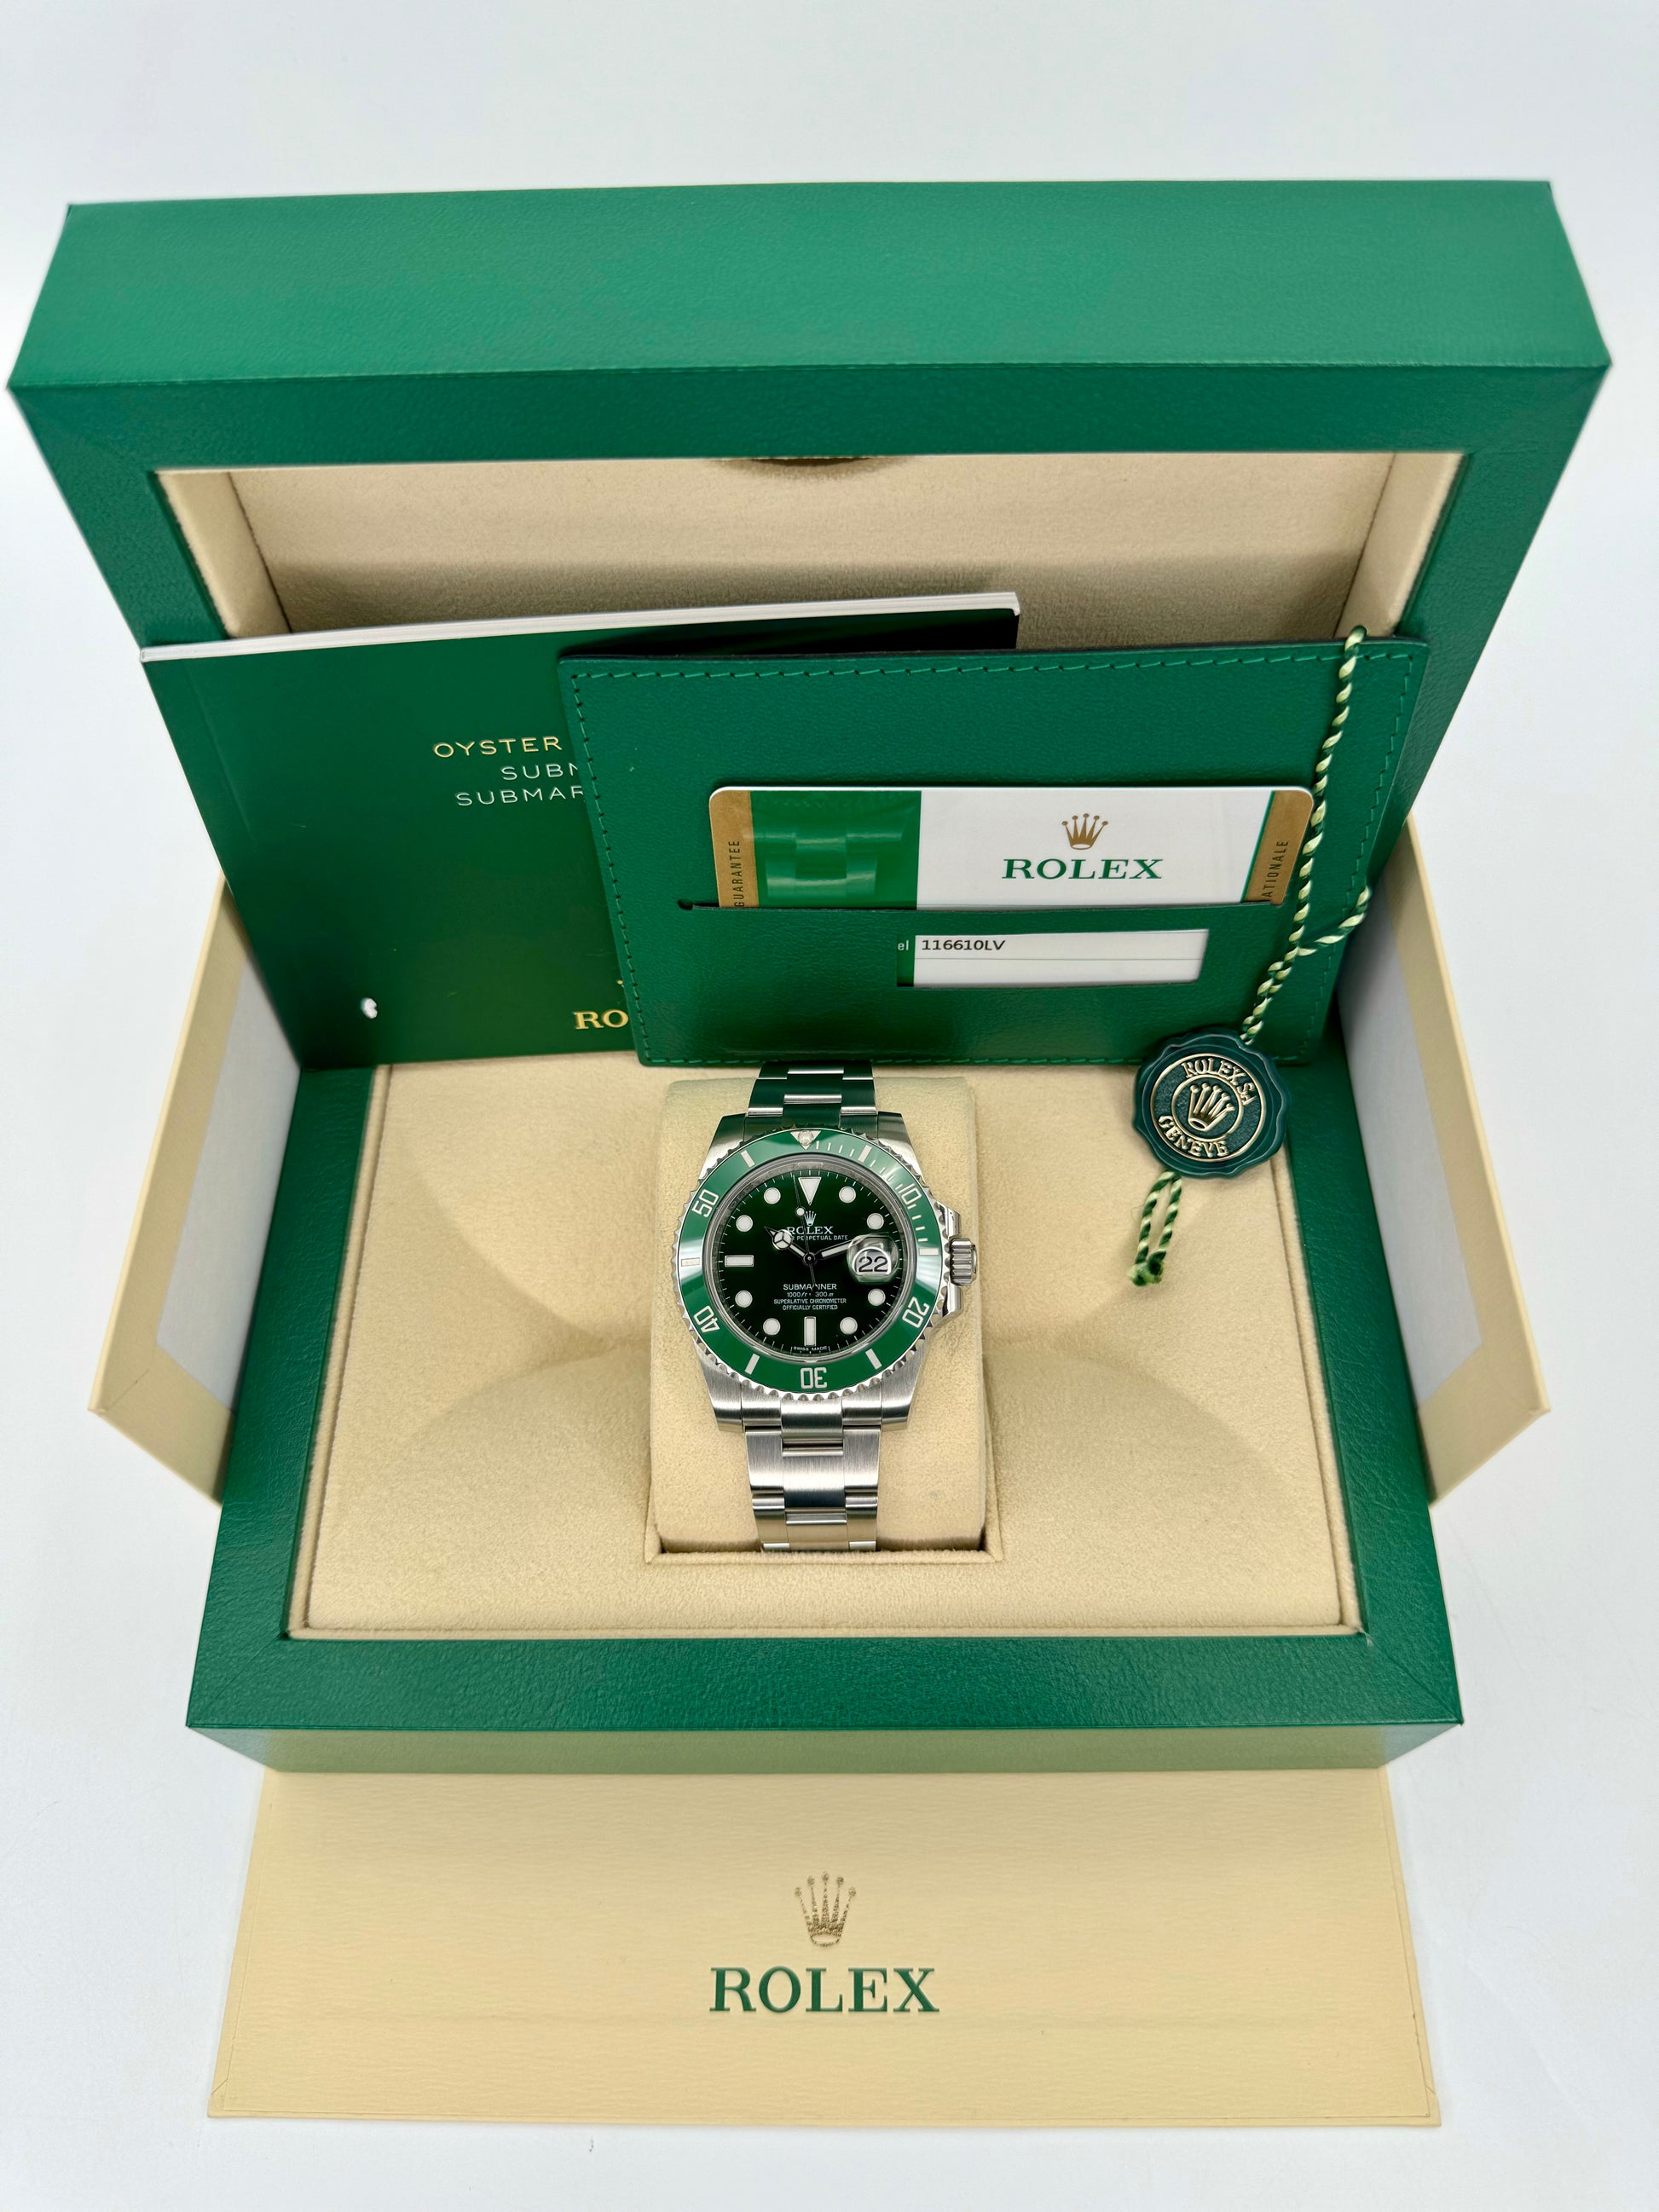 Rolex Submariner Date The Hulk 40mm 116610LV Oyster Green Dial